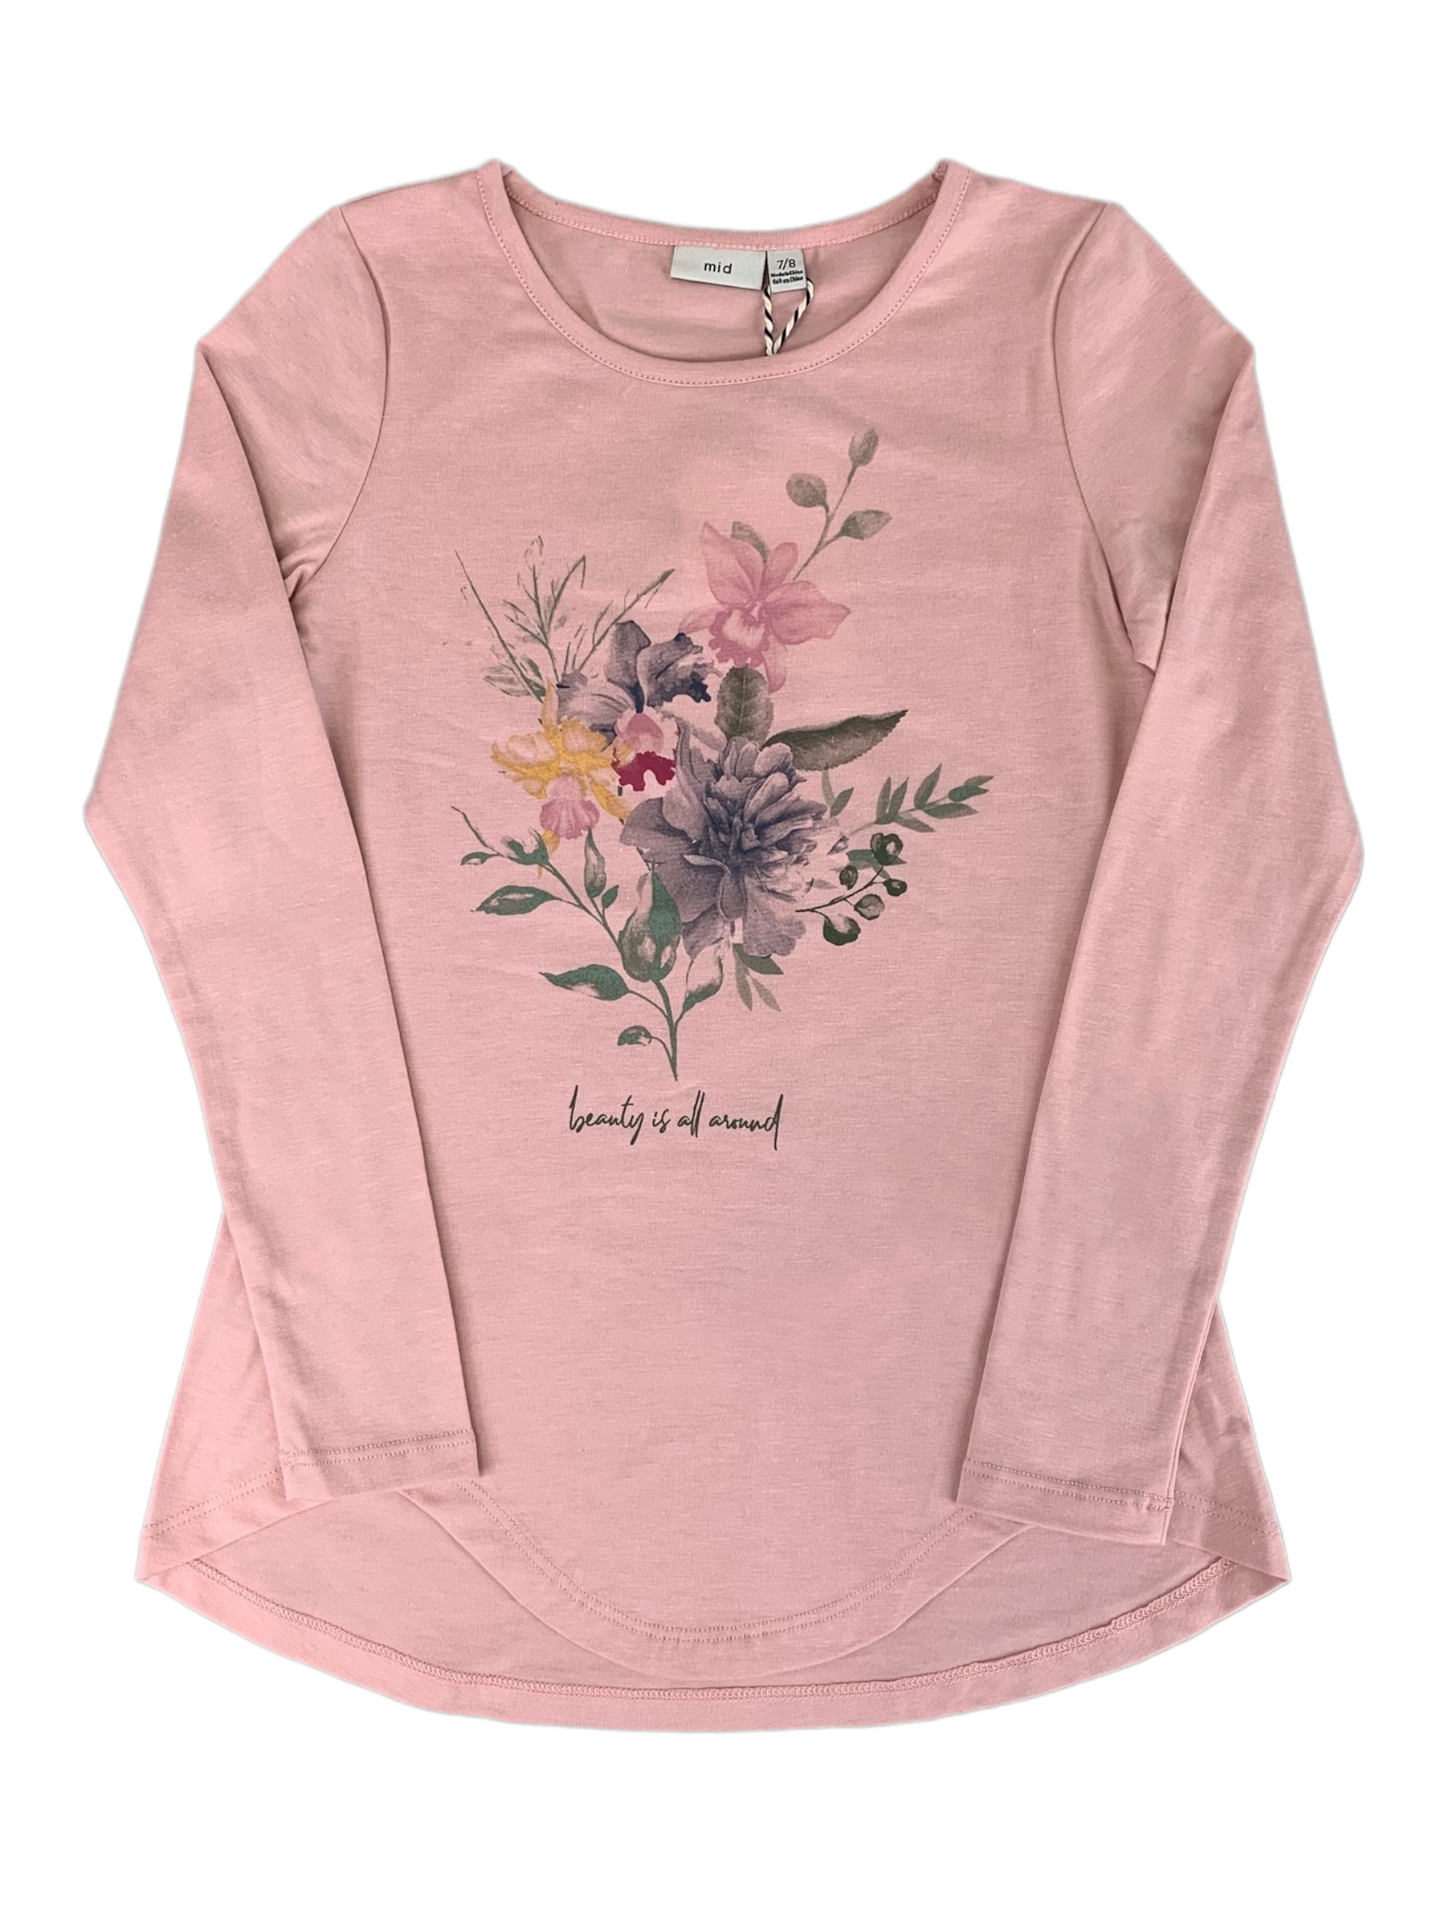 Long-sleeved T-shirt MID for girls 7 to 14 years